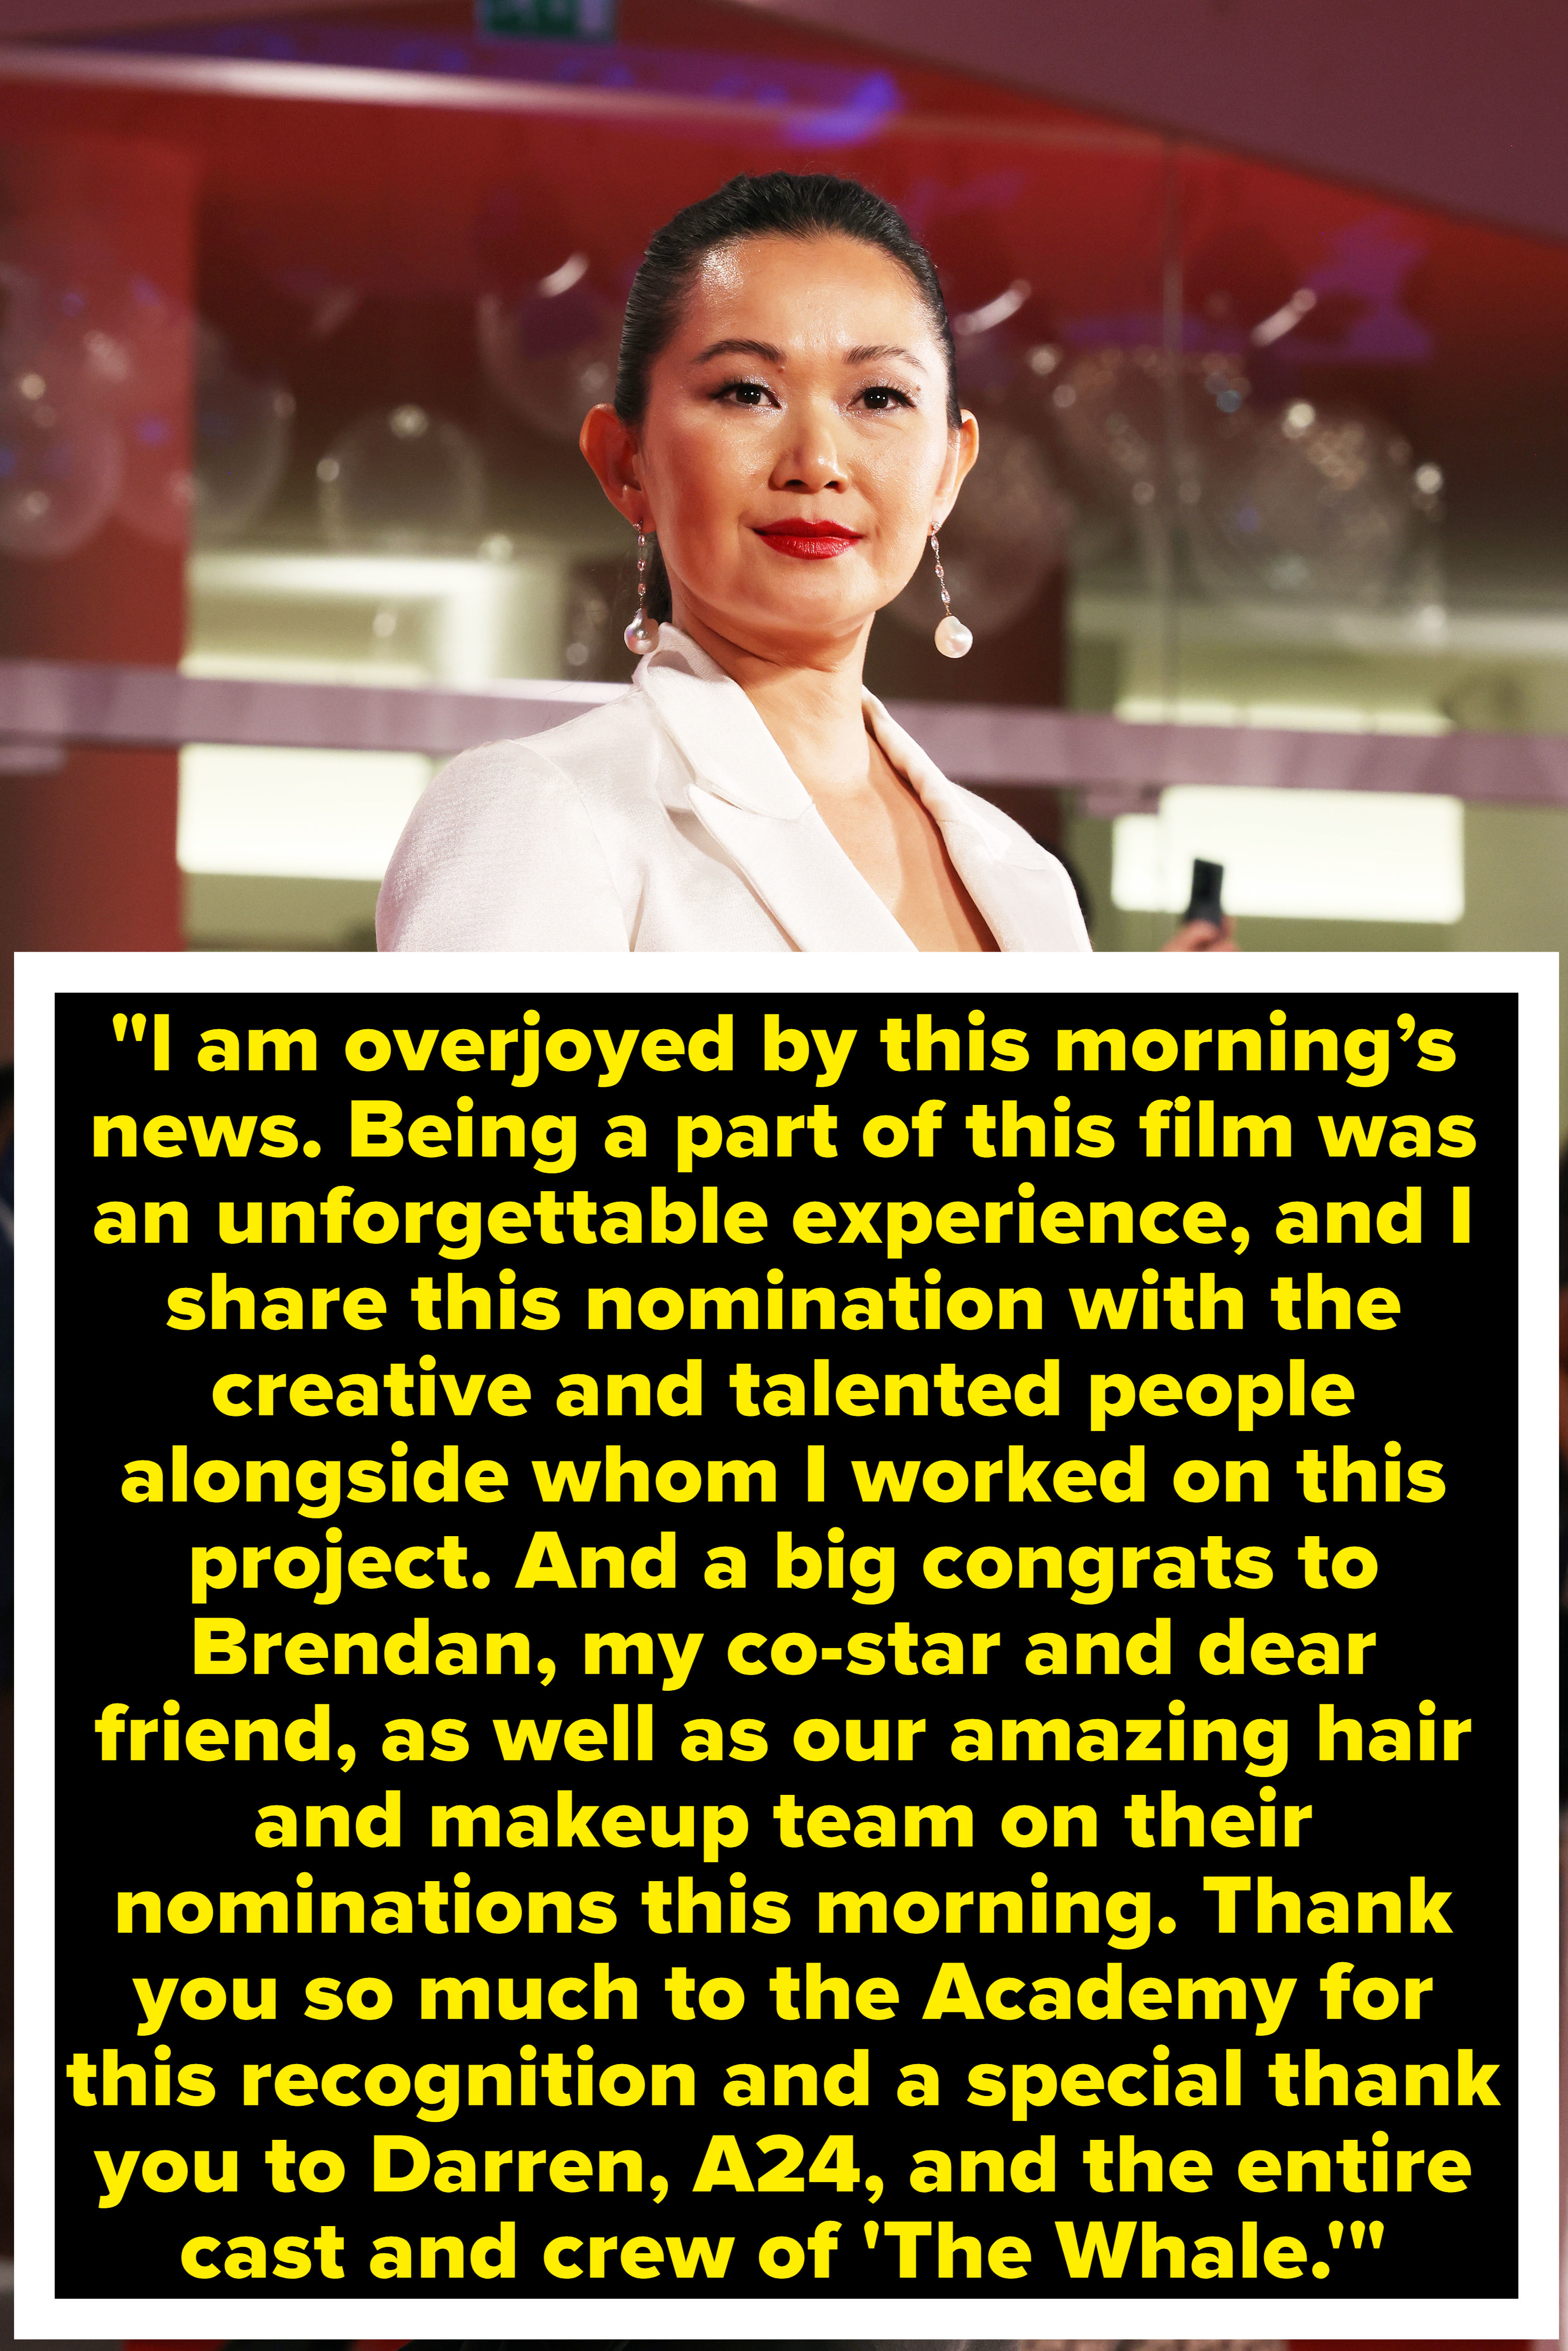 Hong says, in part, &quot;I am overjoyed by this morning&#x27;s news. Being a part of this film was an unforgettable experience, and I share this nomination with the creative and talented people alongside whom I worked on this project&quot;